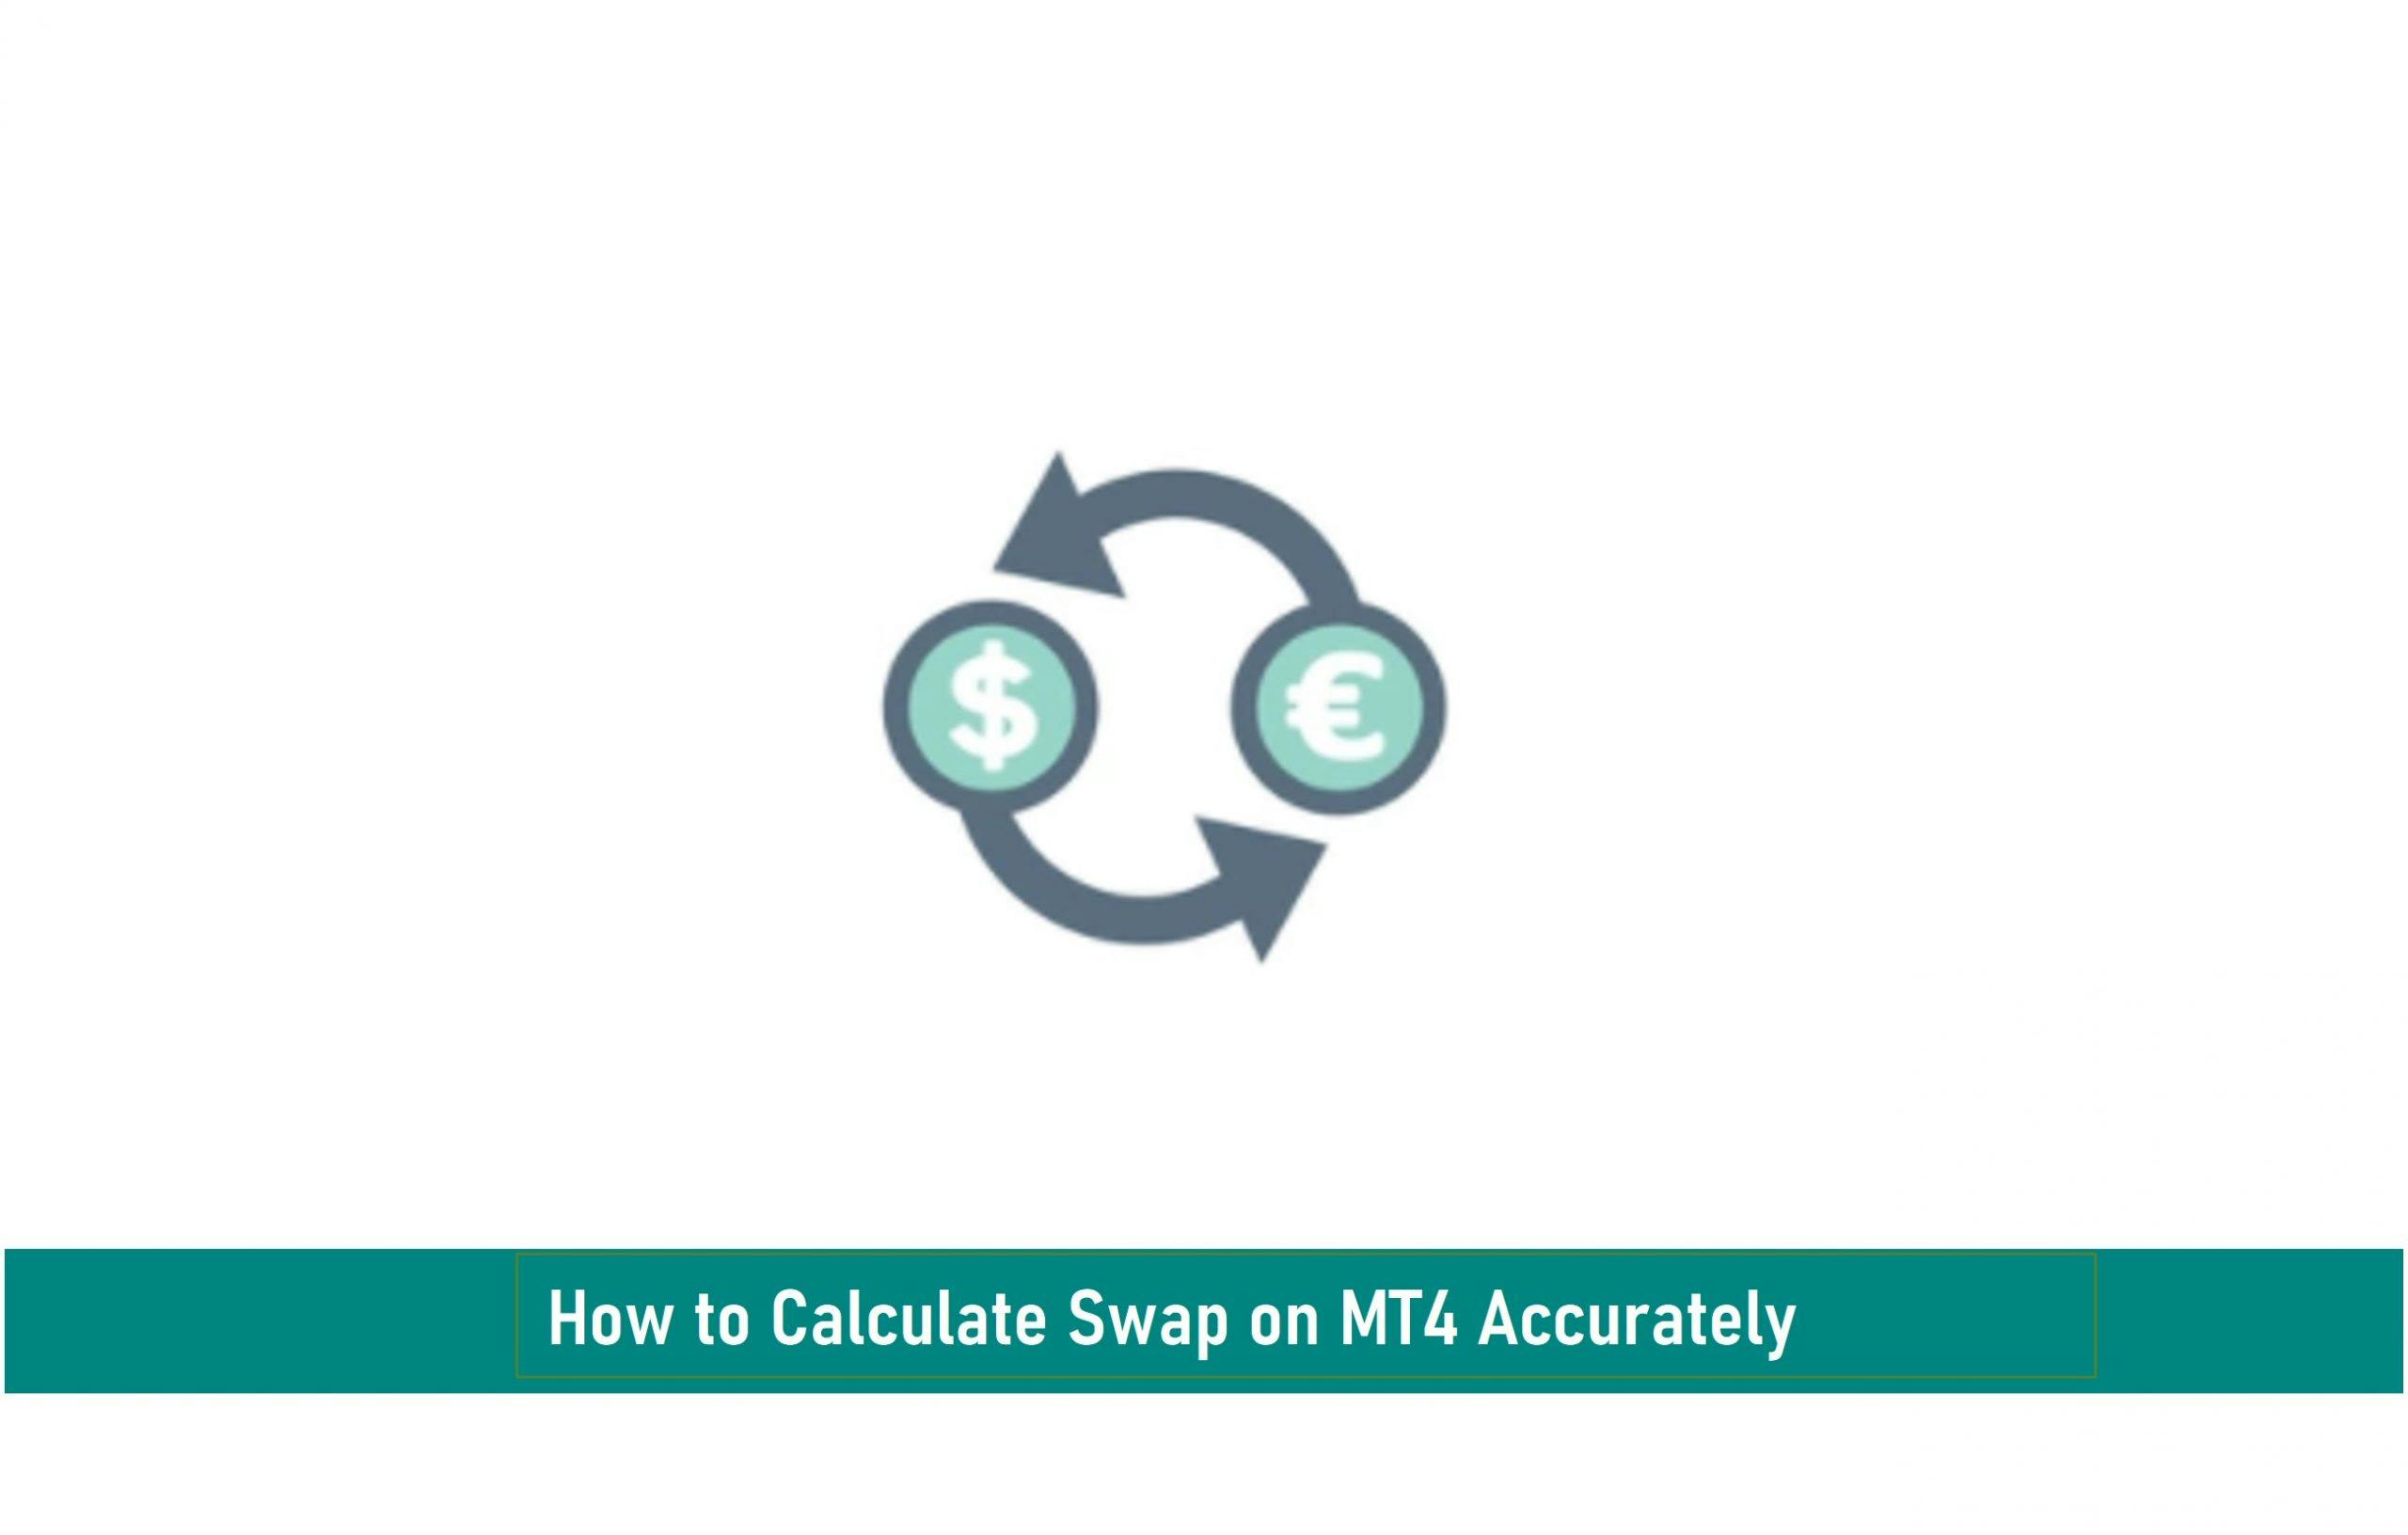 How to Calculate Swap on MT4 Accurately